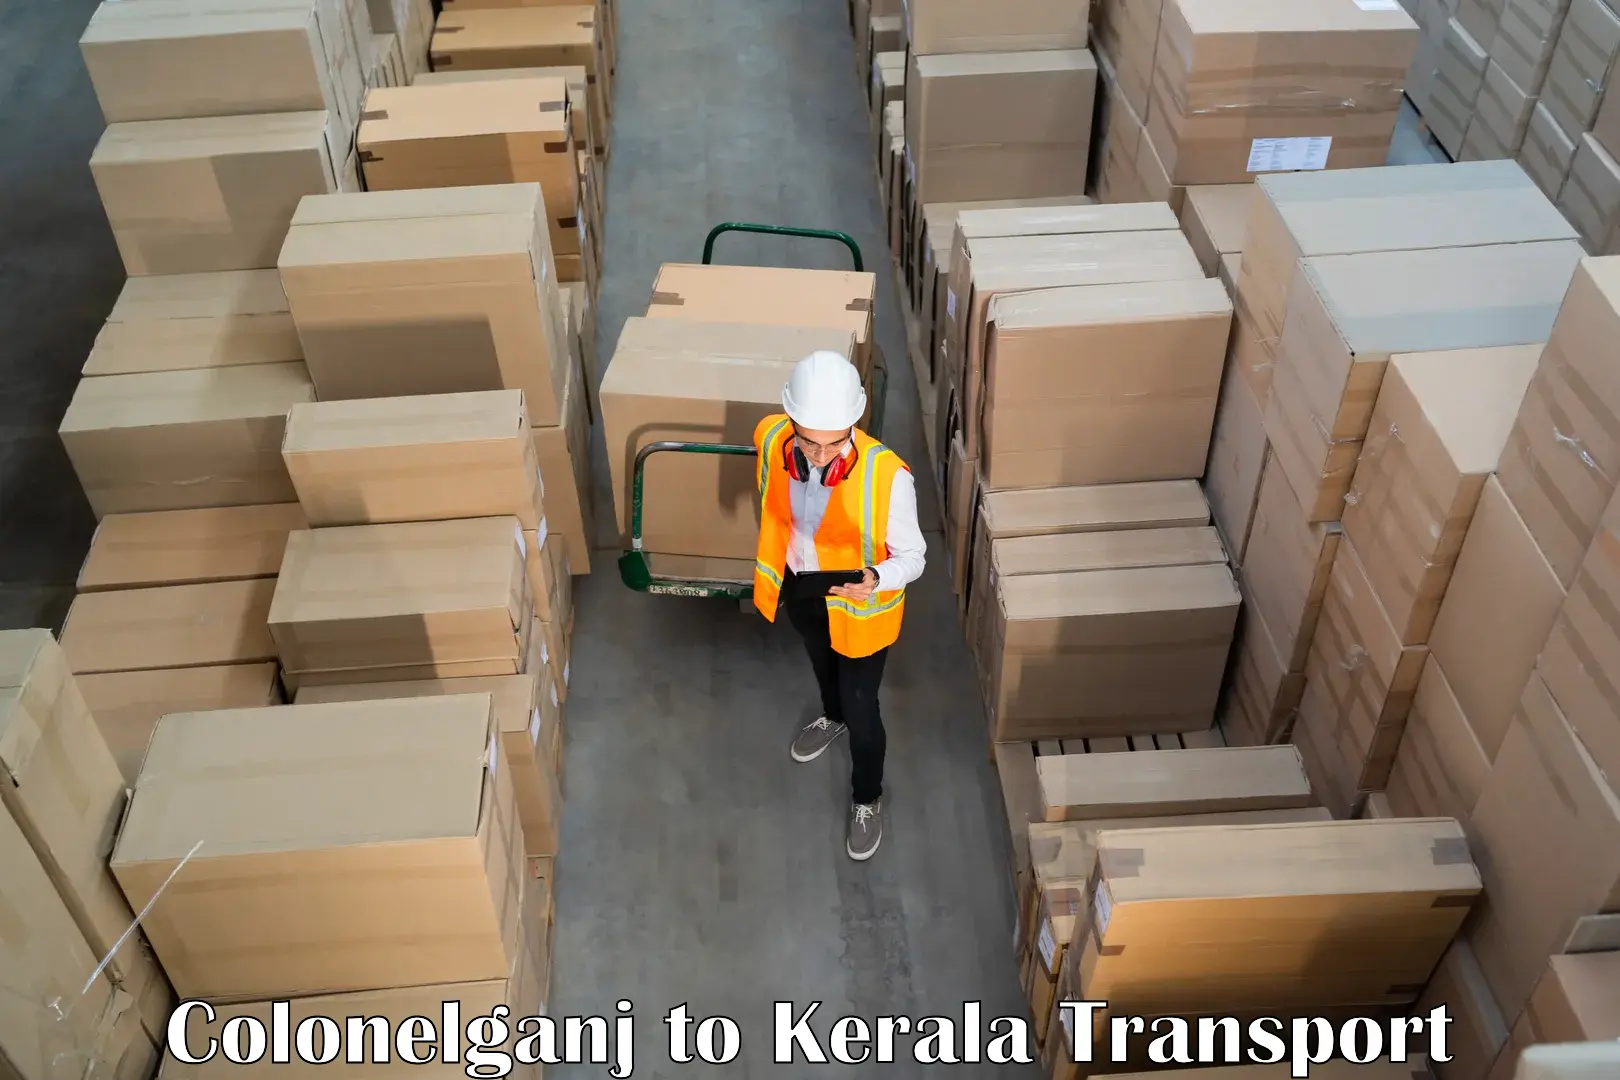 Package delivery services Colonelganj to Kozhikode